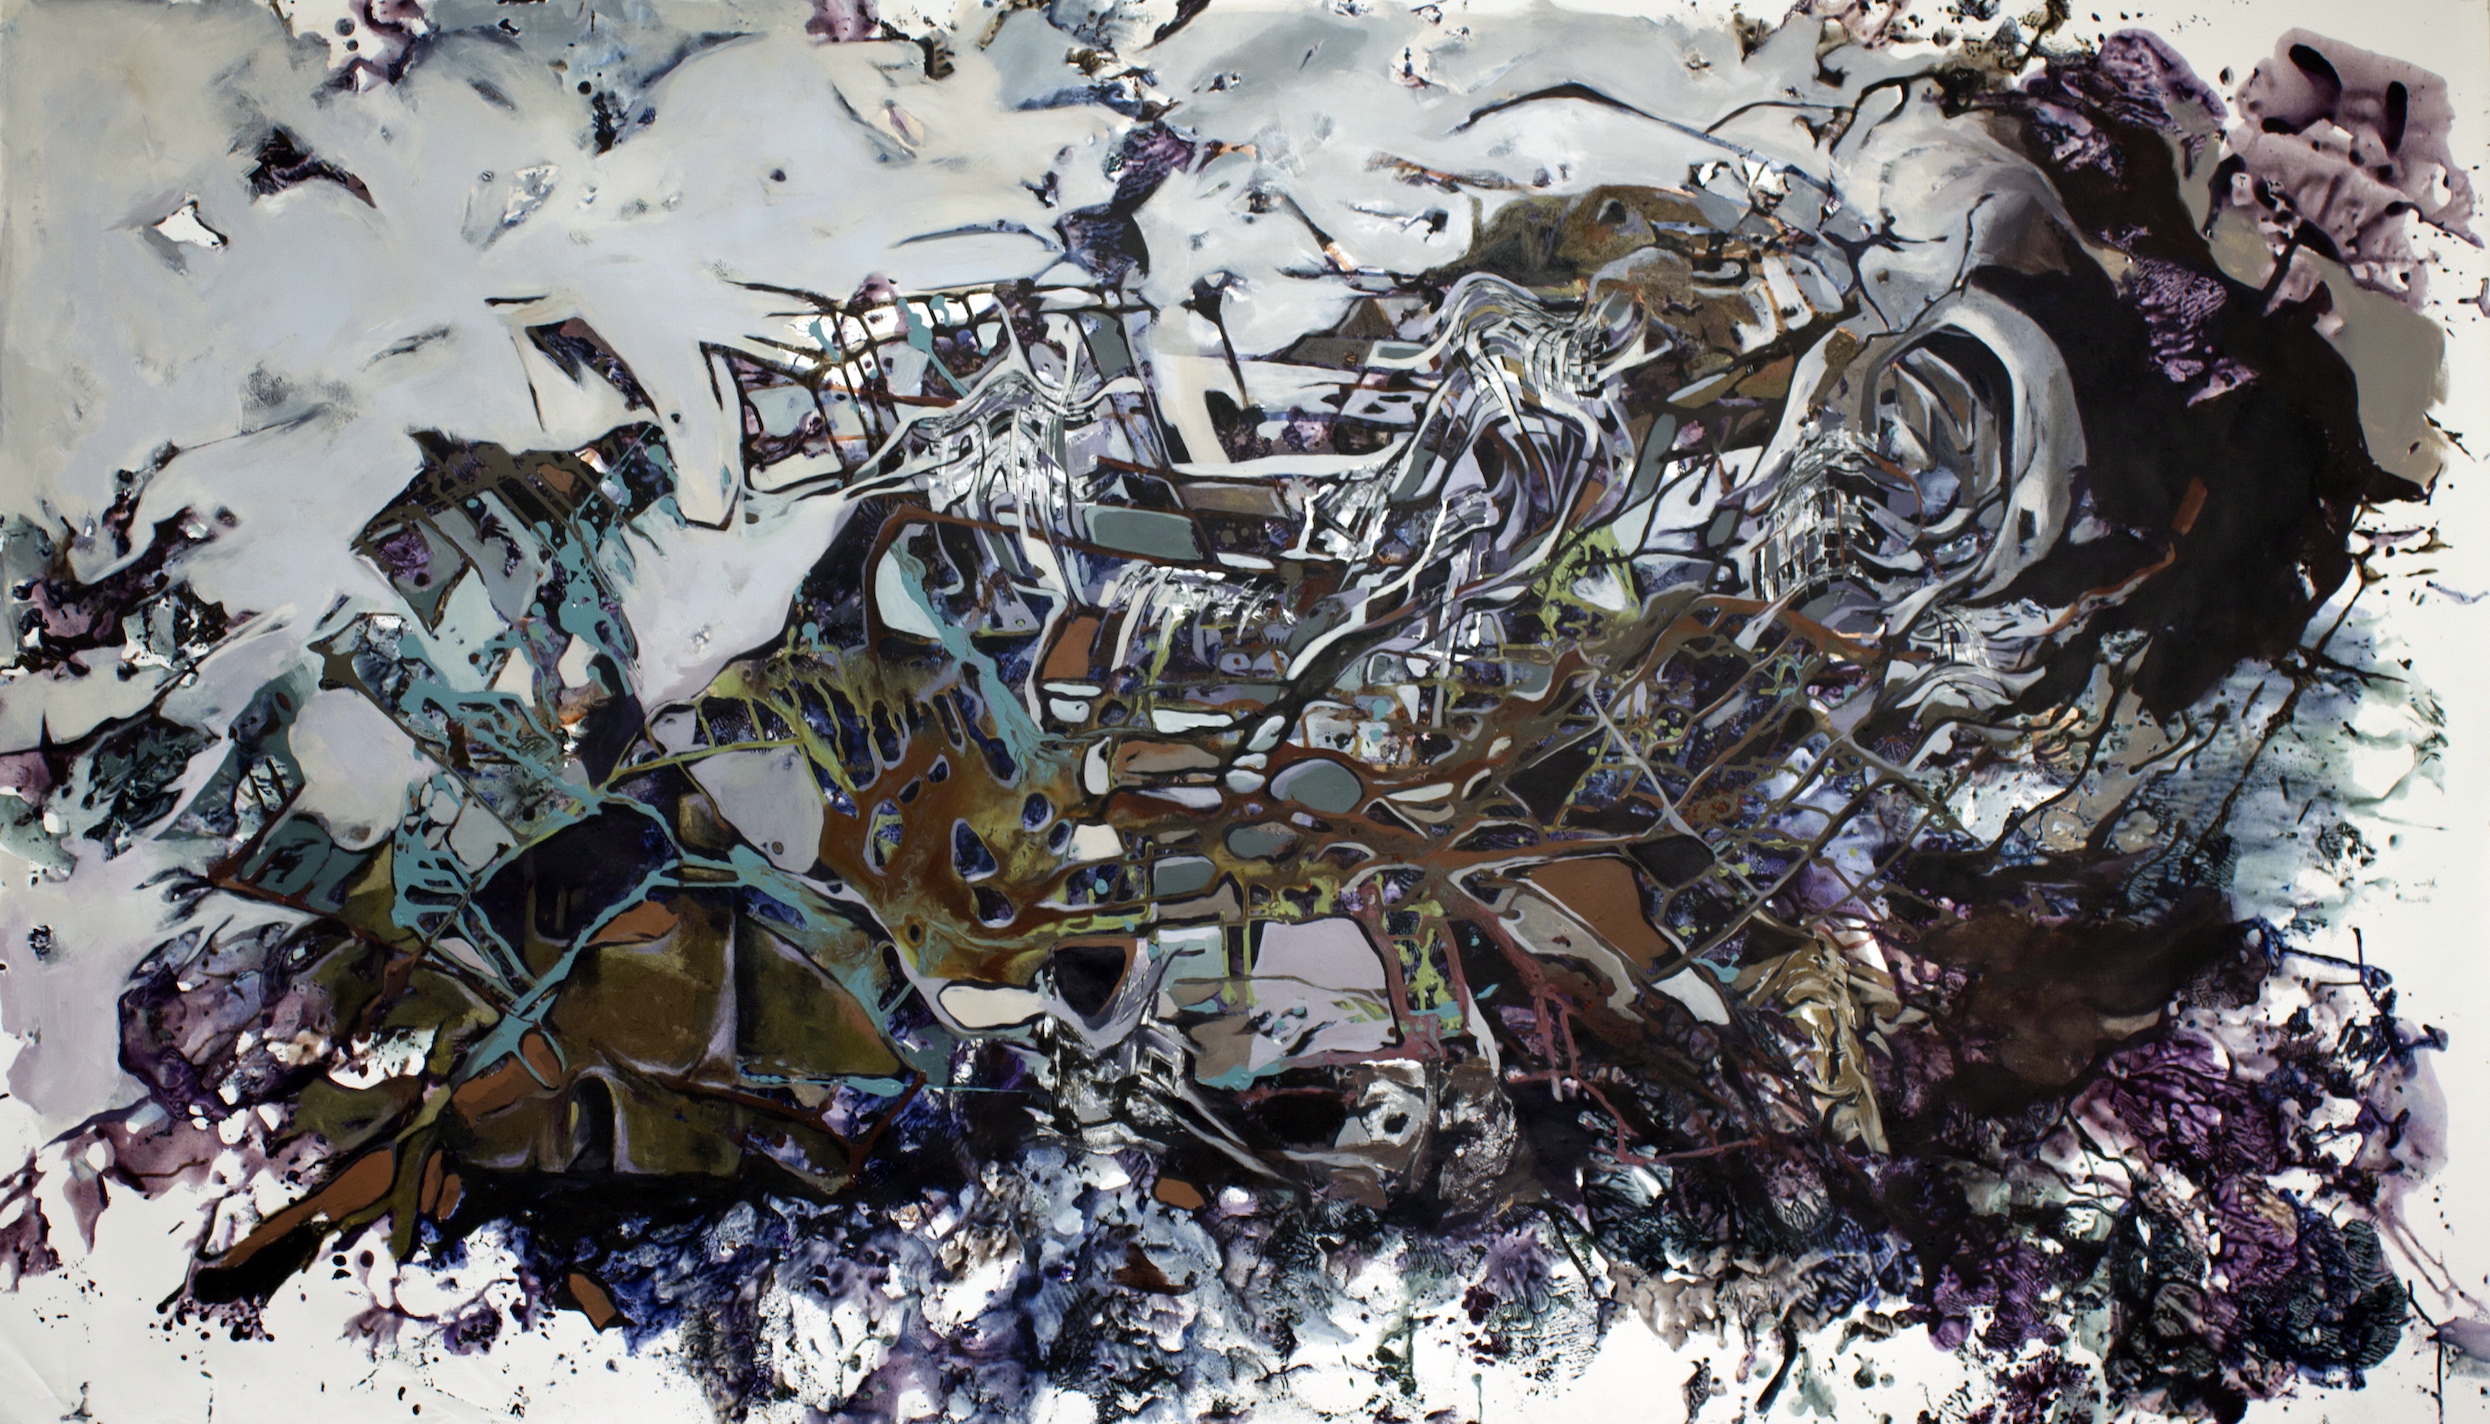 Landscape #18, acrylic on canvas 53x94.5 inches, 2012